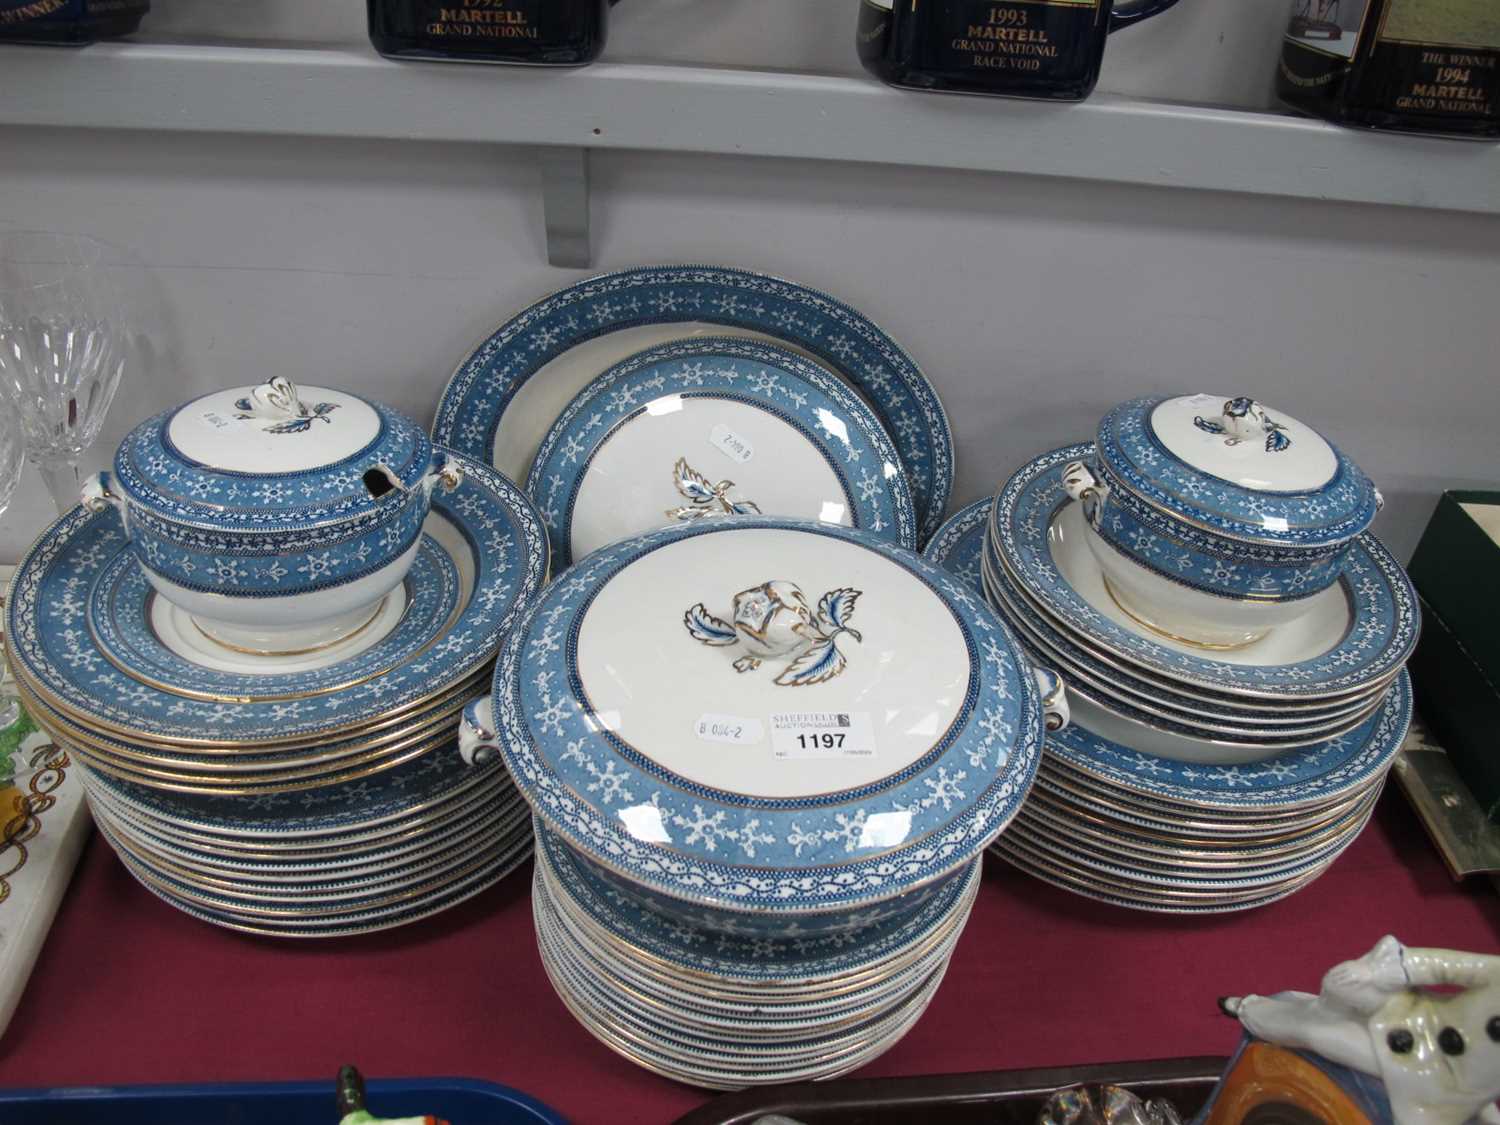 Cetem Ware 'Maltese' Pattern Dinneware, approximately fifty pieces.